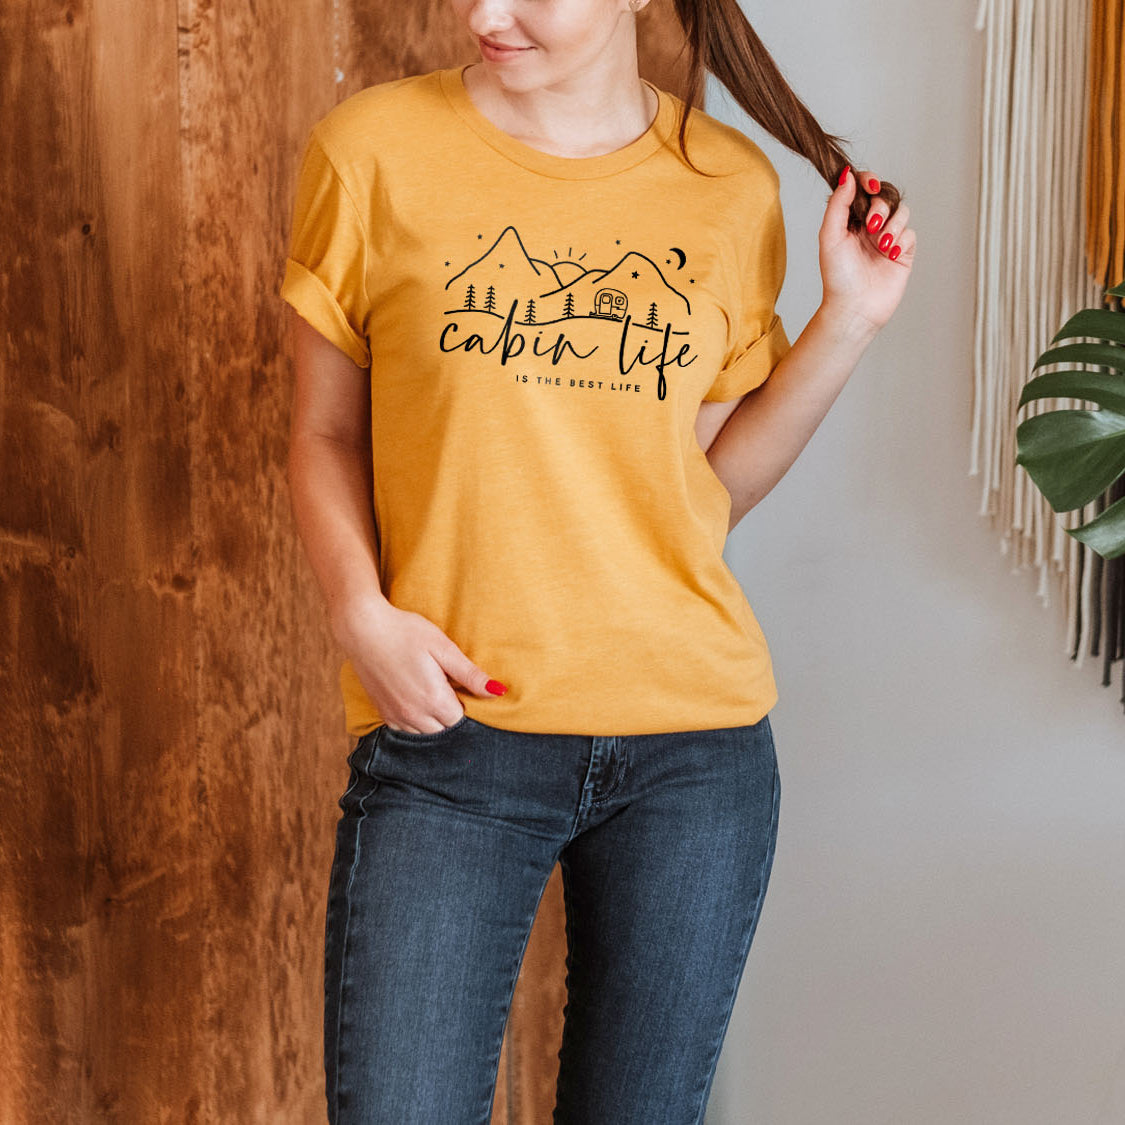 Cabin Life Is The Best Life T-shirt - Outdoor Nature Camping Retro Vintage Design Printed Tee Shirt